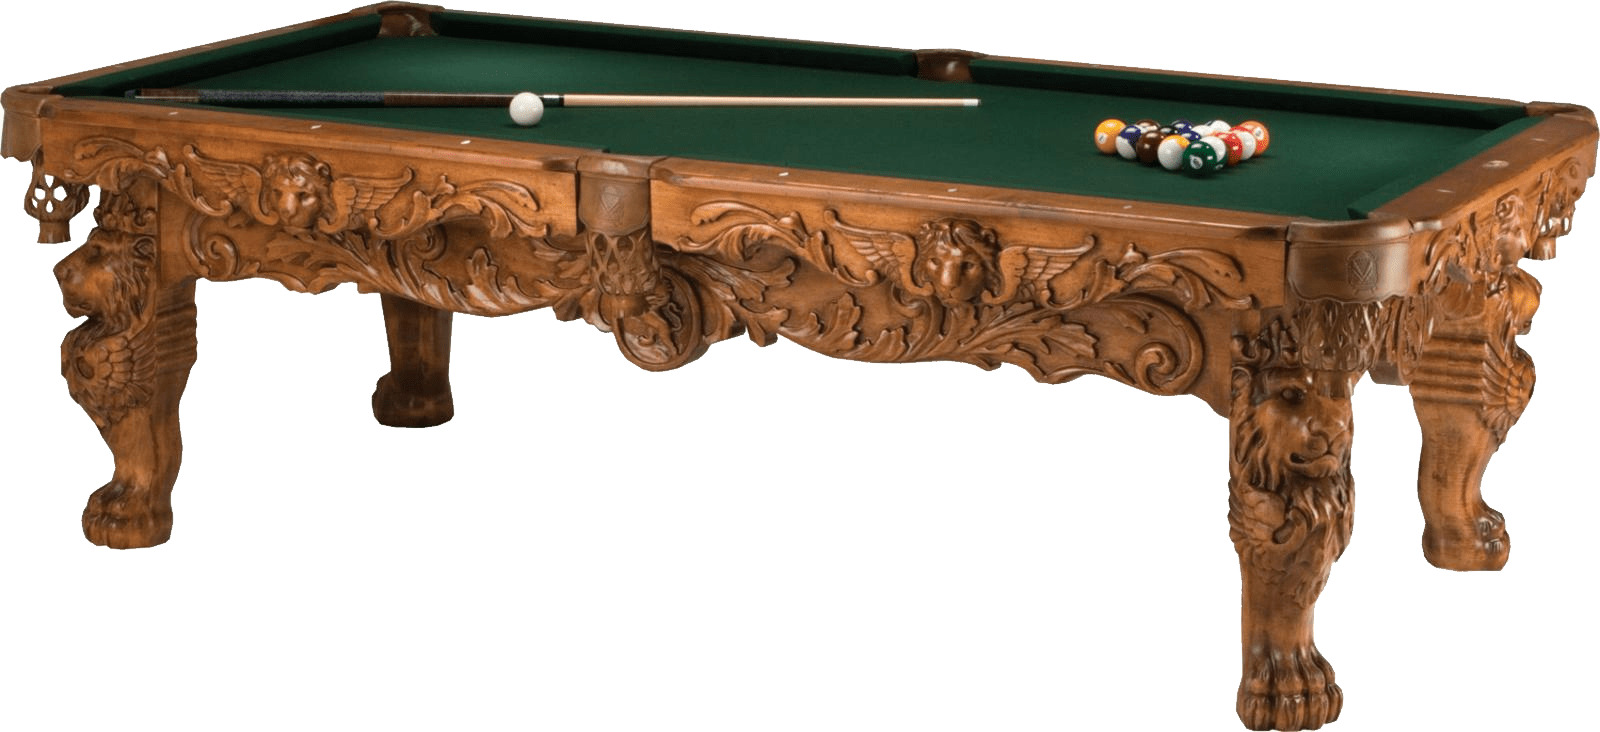 Very Ornate Billiard Table png icons